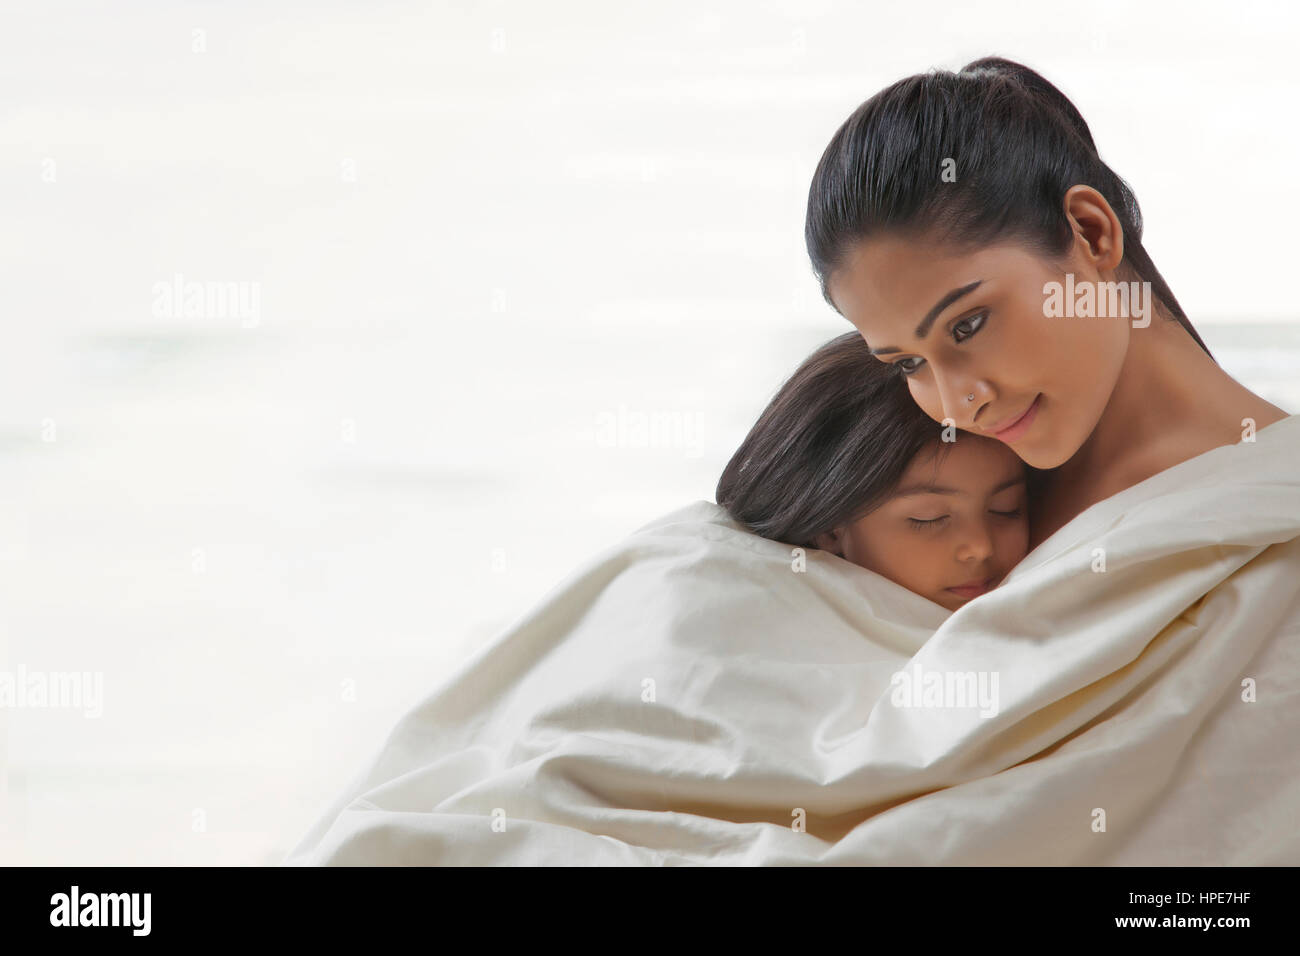 Mother and daughter wrapped in a blanket Stock Photo